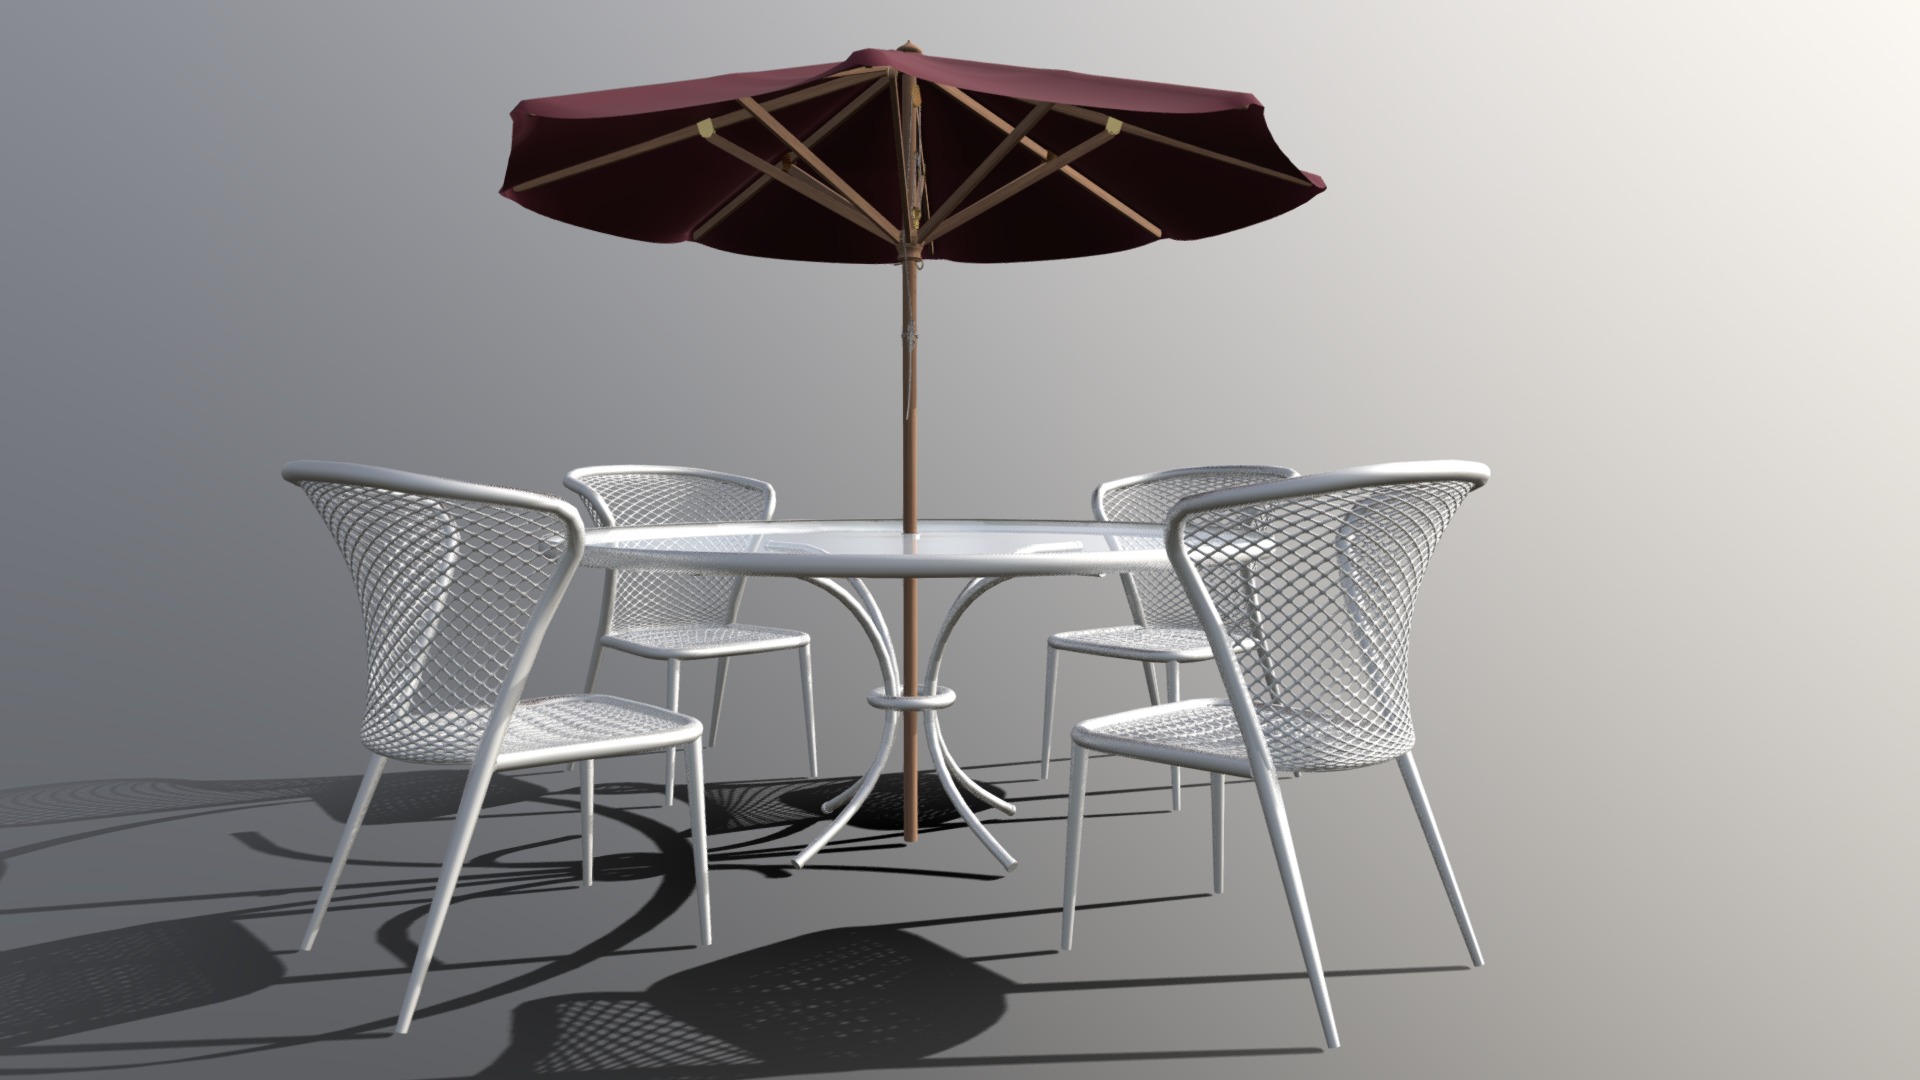 3D model Patio Dinette with Umbrella - This is a 3D model of the Patio Dinette with Umbrella. The 3D model is about a table and chairs with an umbrella.